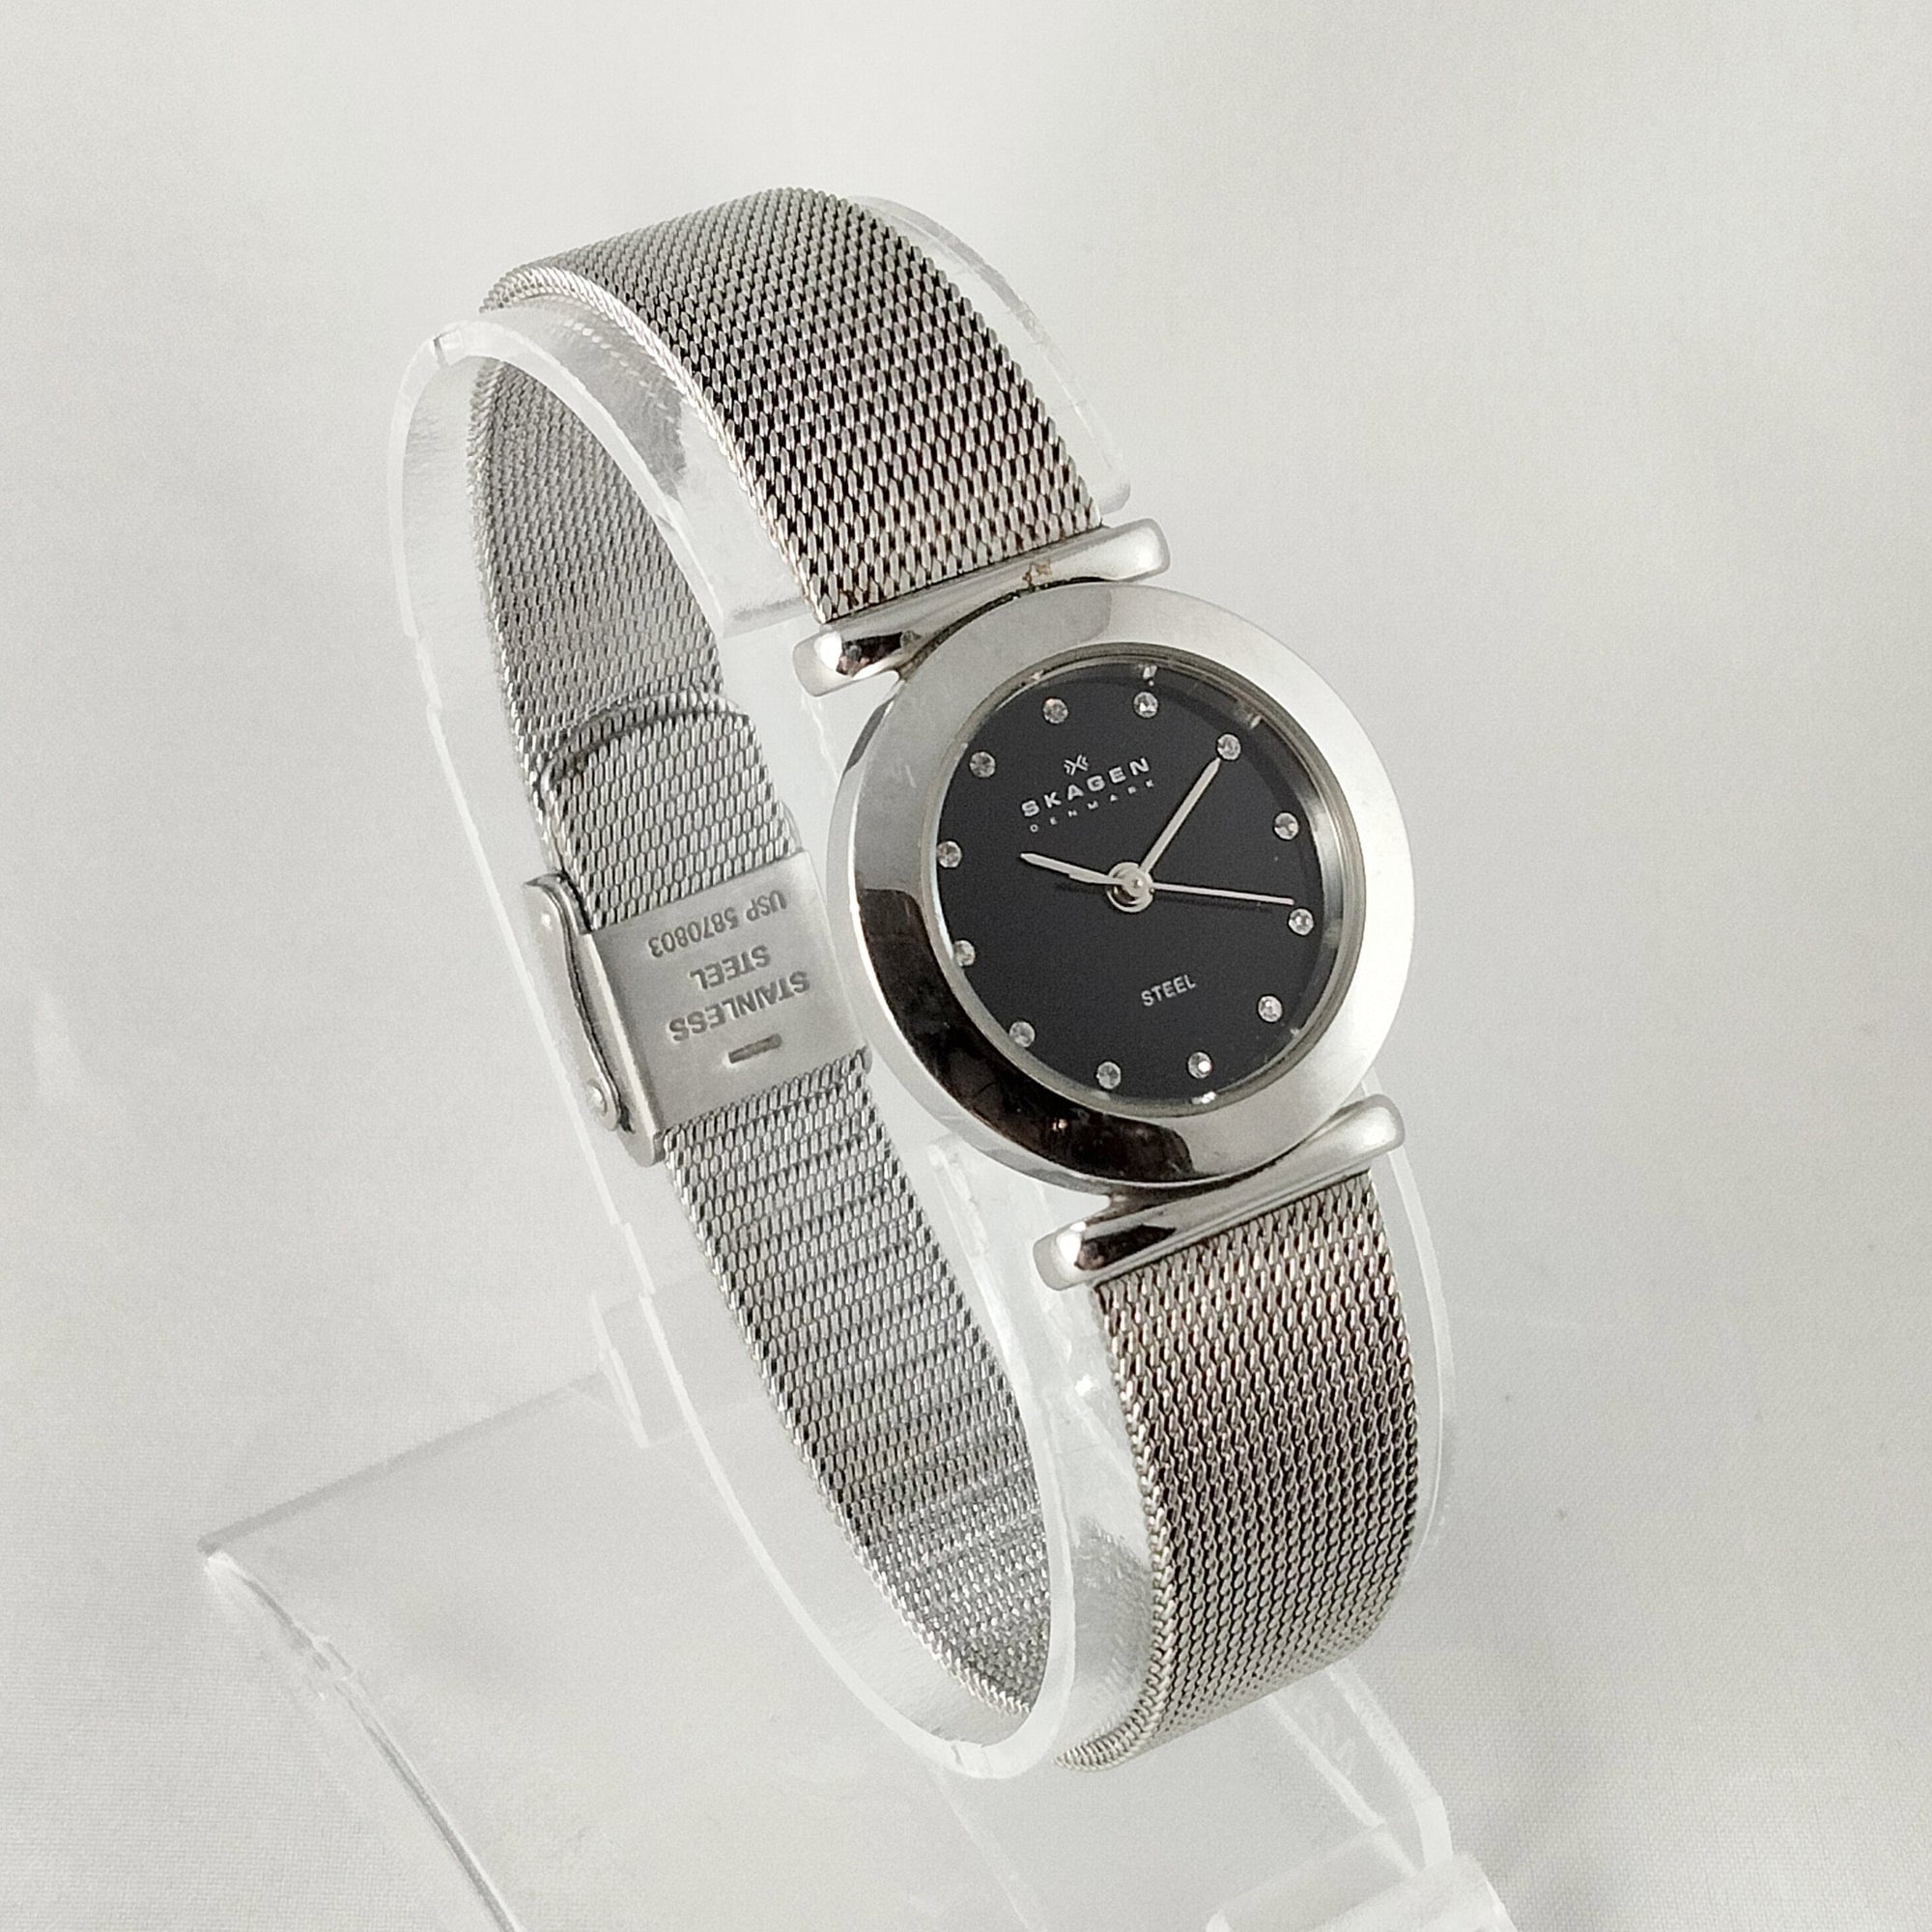 I Like Mikes Mid Century Modern Watches Skagen Stainless Steel Women's Watch, Black Dial with Jewel Hour Markers, Mesh Strap